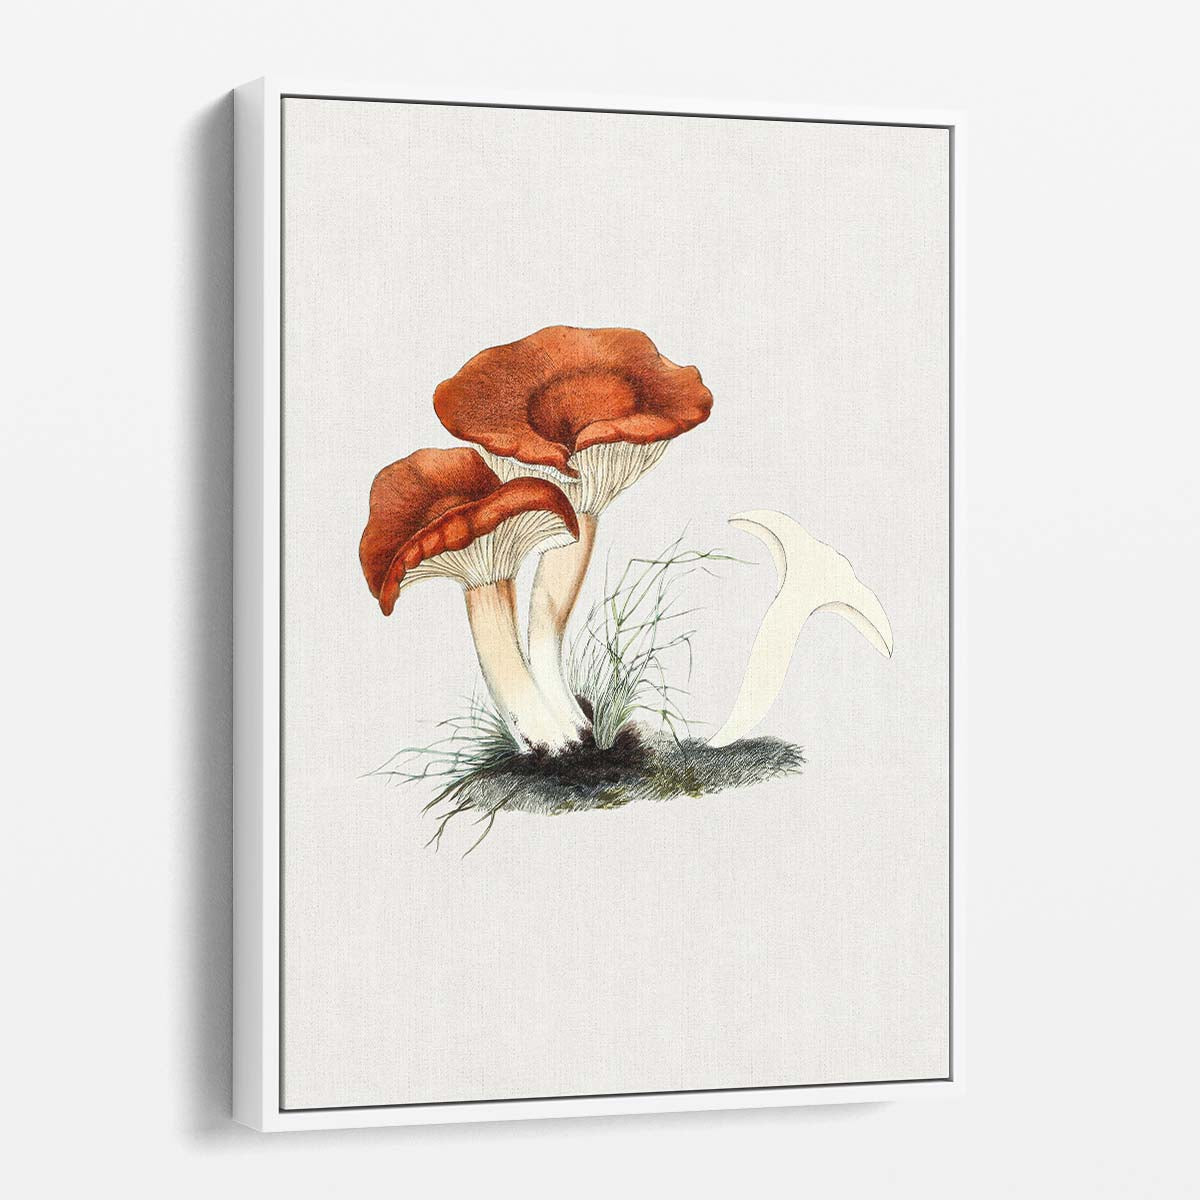 Vintage Hand-Drawn Red Rufous Milkcap Mushroom Illustration Wall Art by Luxuriance Designs, made in USA